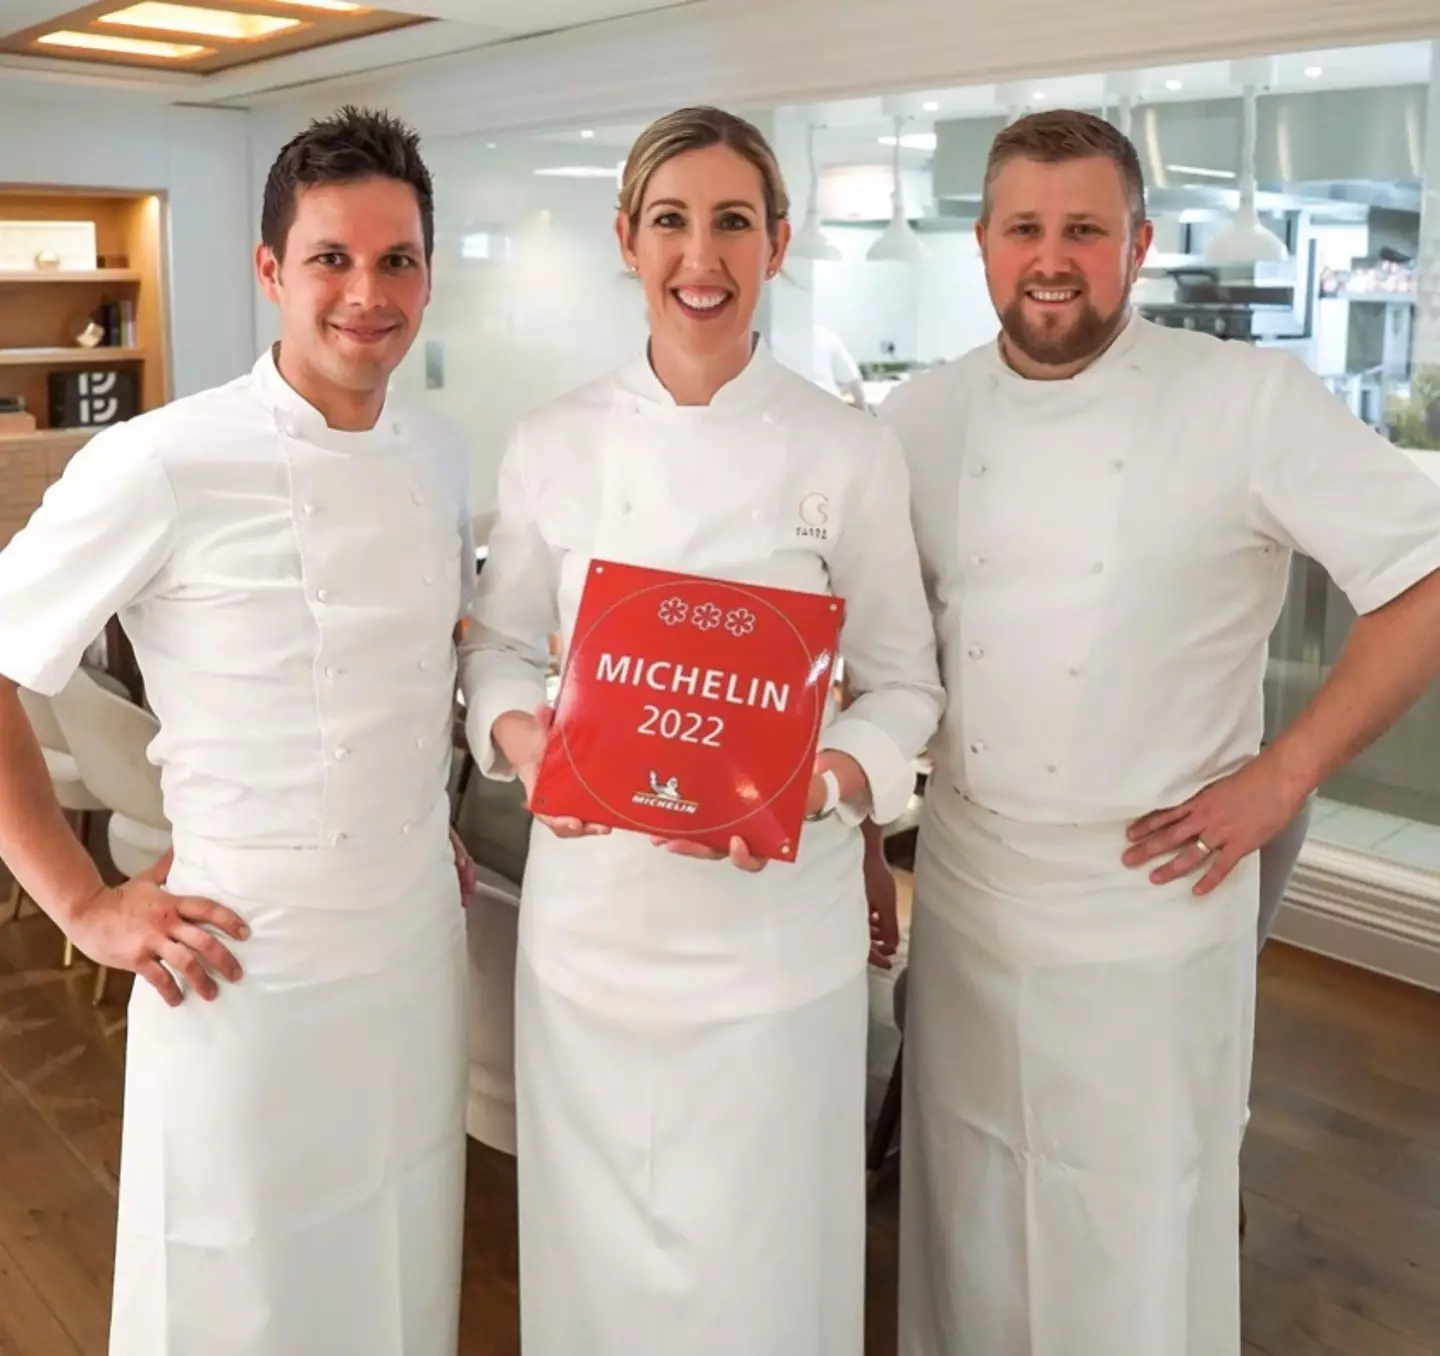 Clare Smyth MBE made history by becoming the first British female chef to win three Michelin stars.